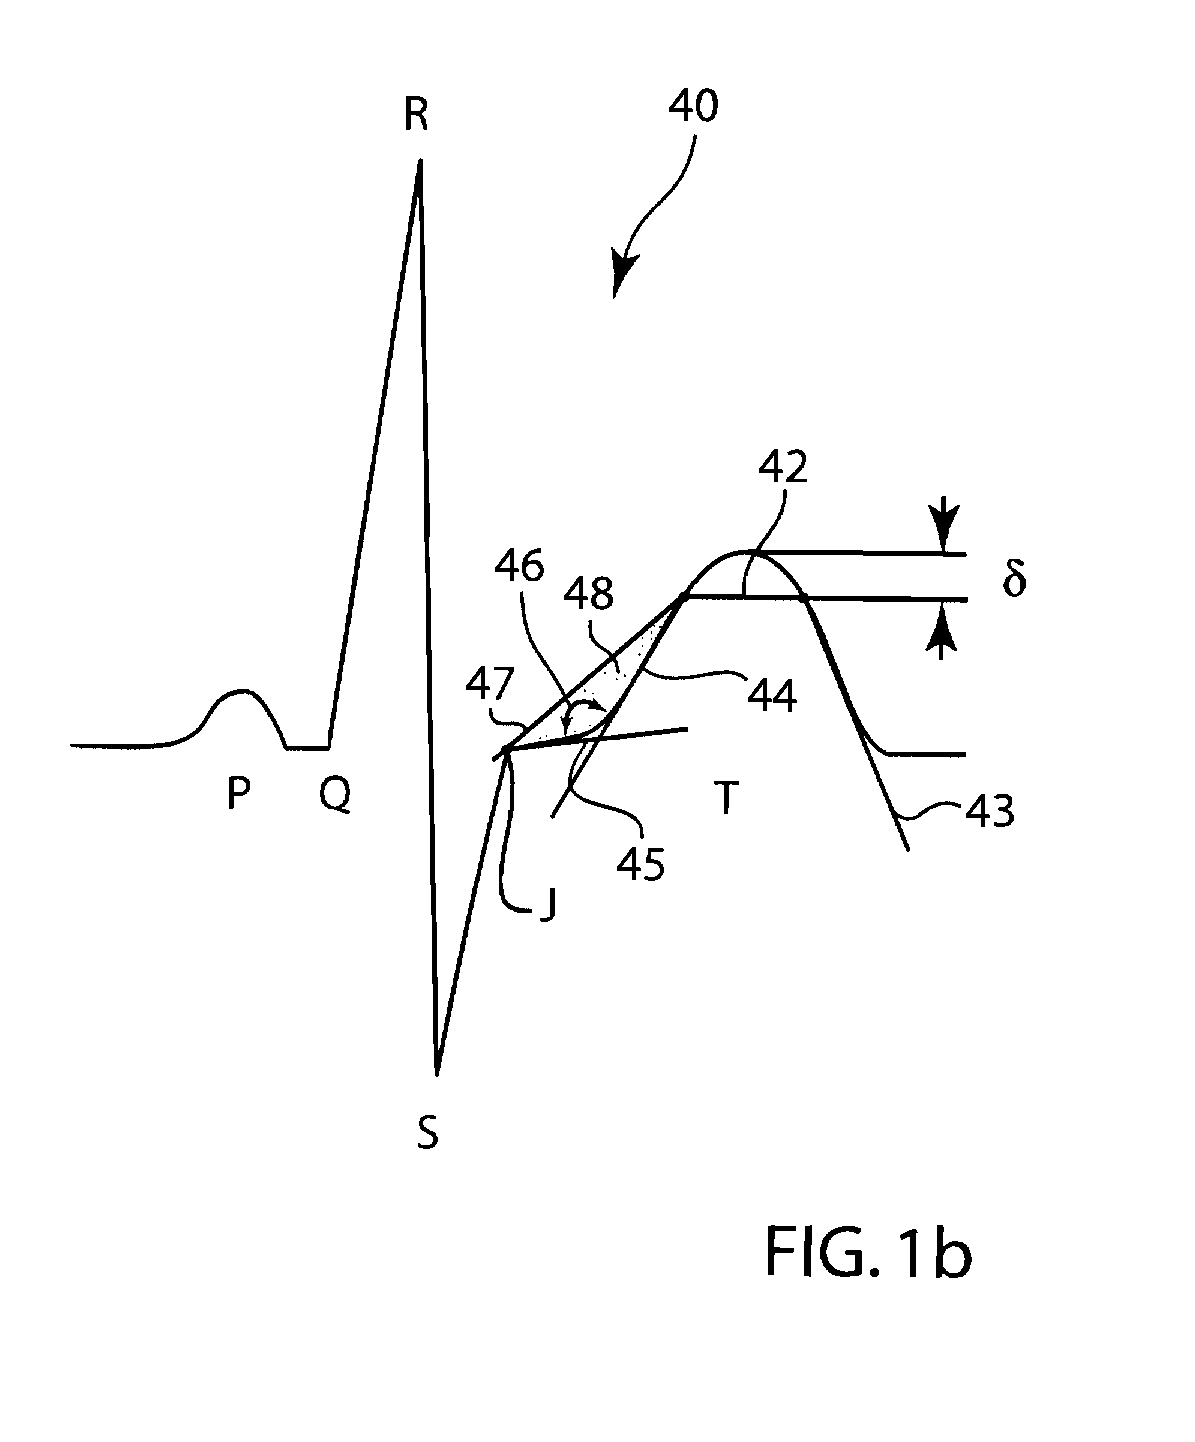 Method of physiological data analysis and measurement quality check using principal component analysis